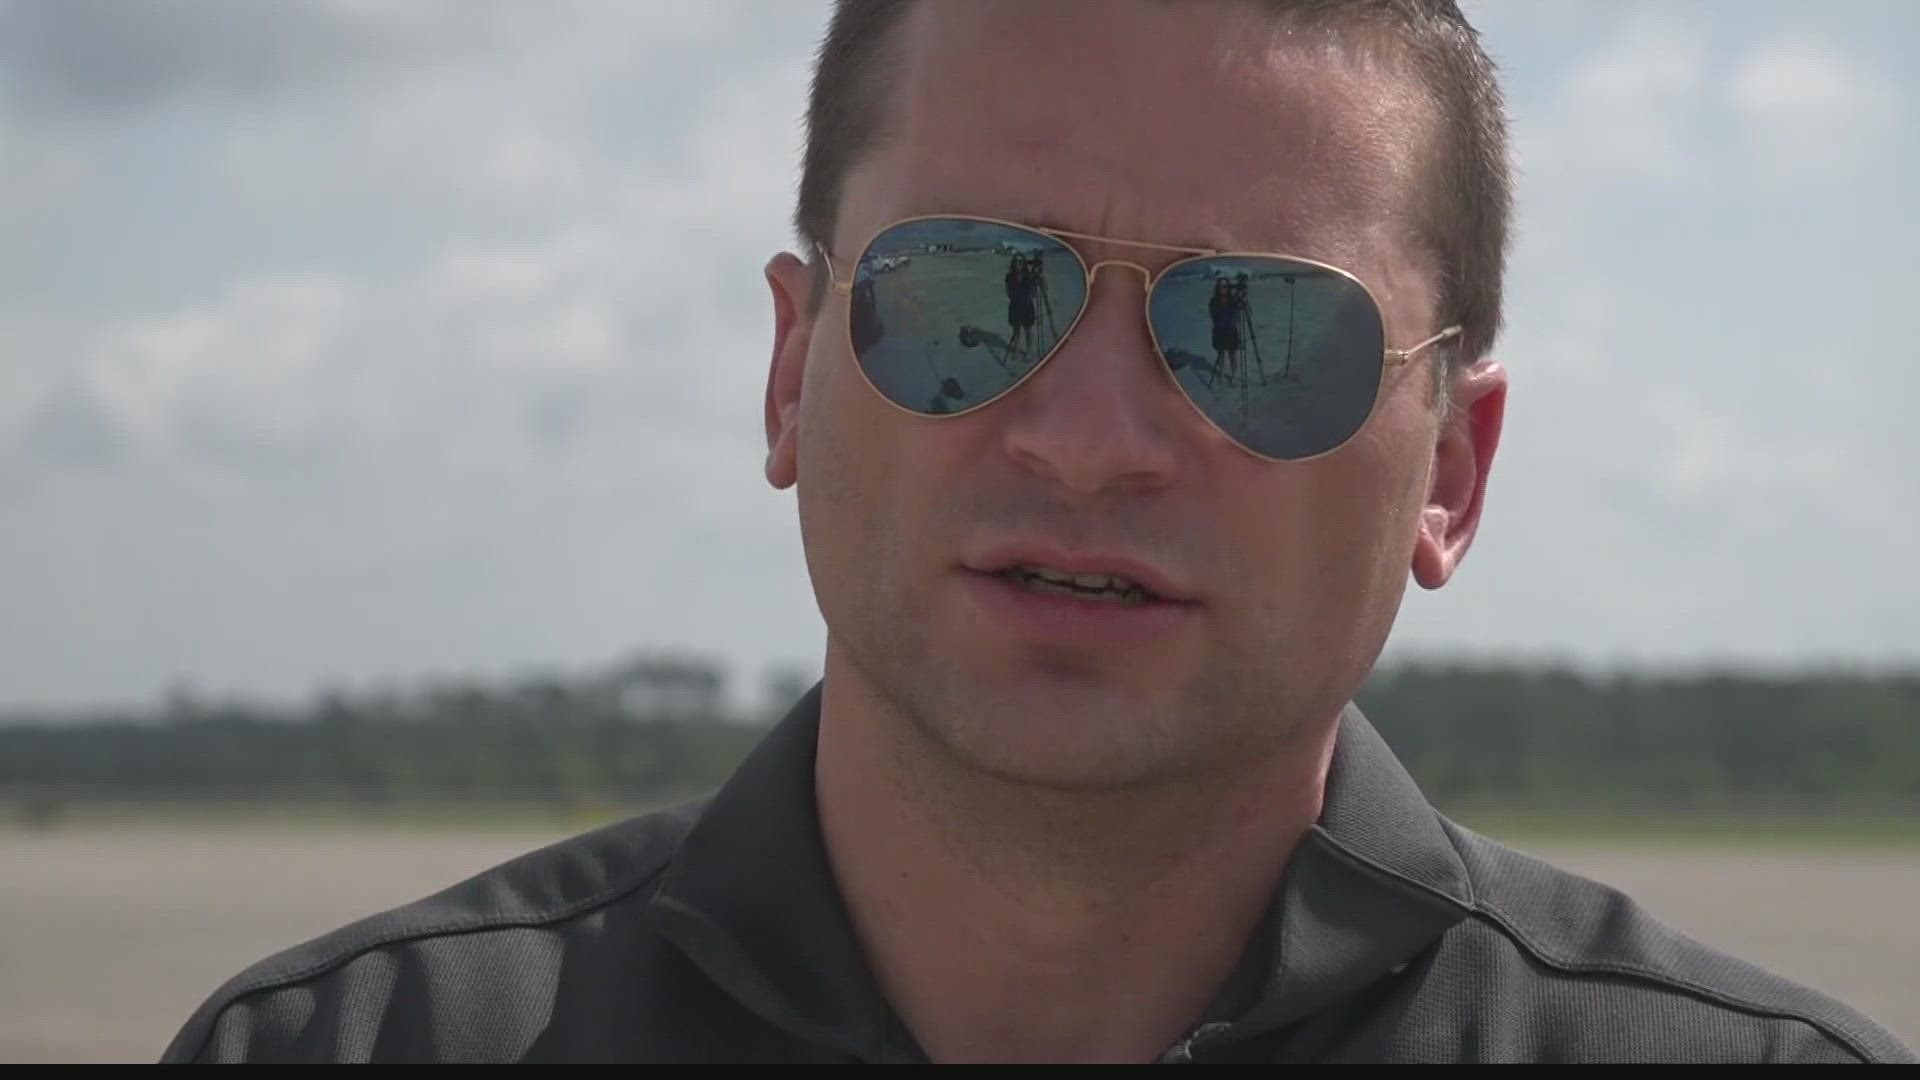 "'Top Gun' was definitely a huge part of my reason for getting into the aviation industry," said Matt Bocchino, pilot and director of Cecil Airport and Spaceport.